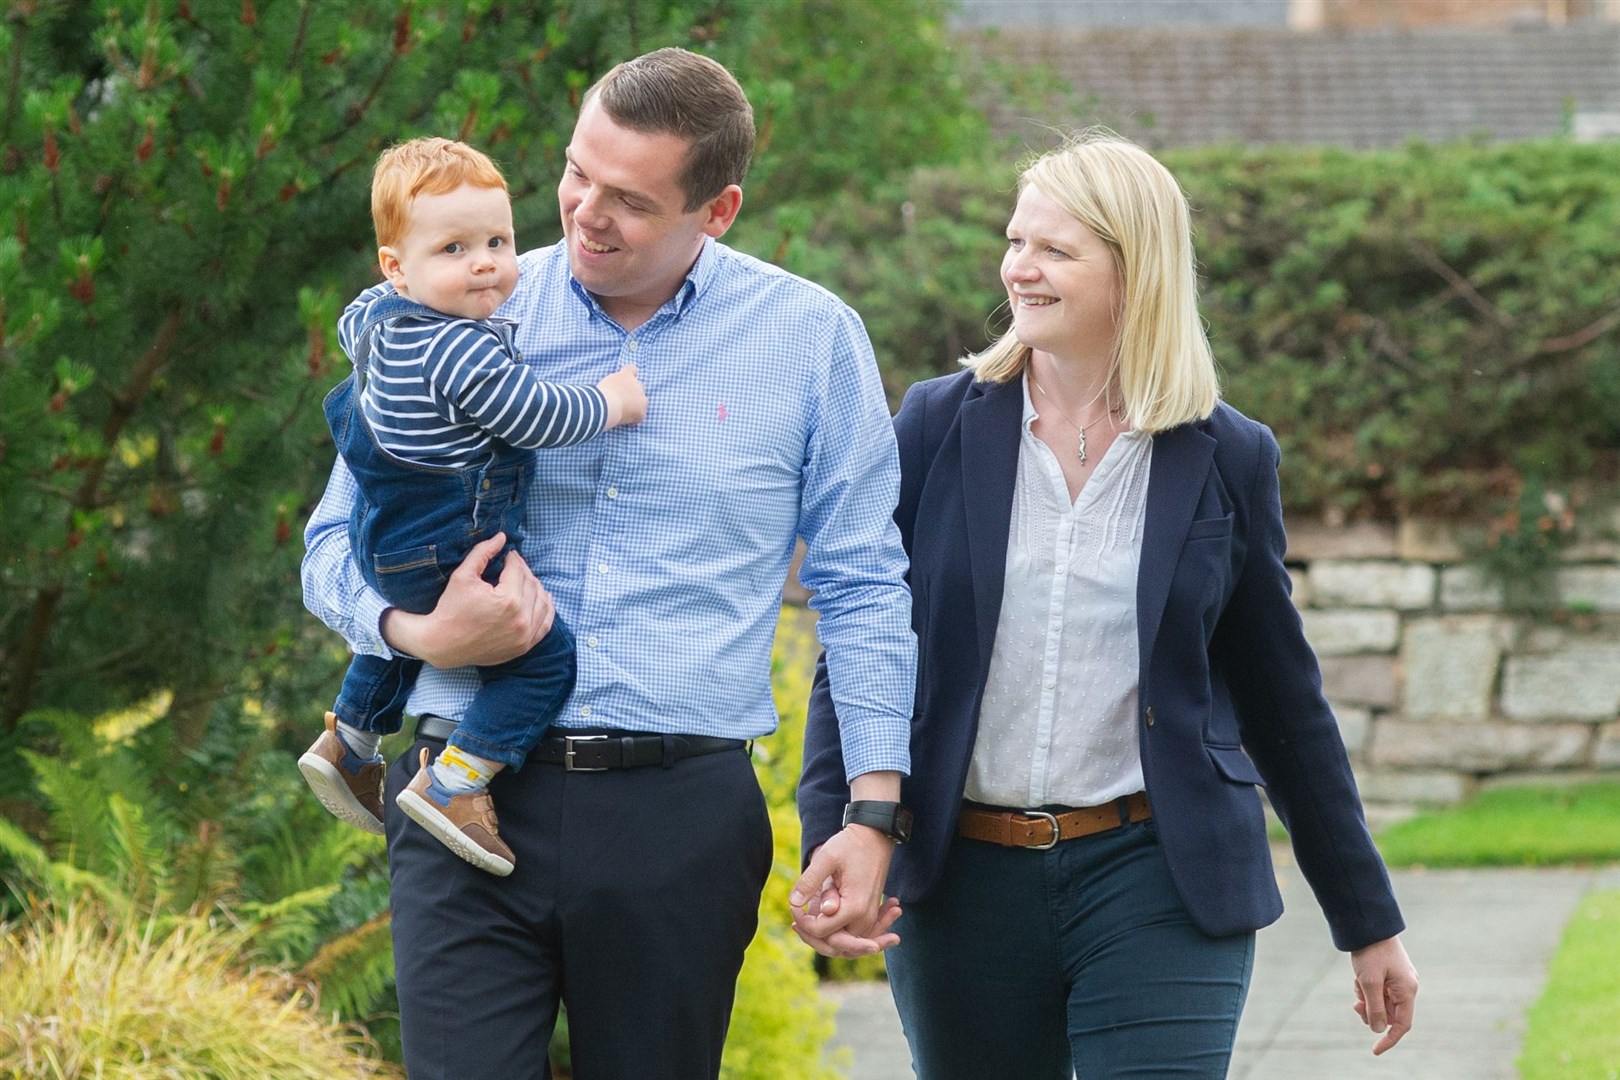 Douglas Ross with wife Krystle and son Alistair in Grant Park. Picture: Daniel Forsyth